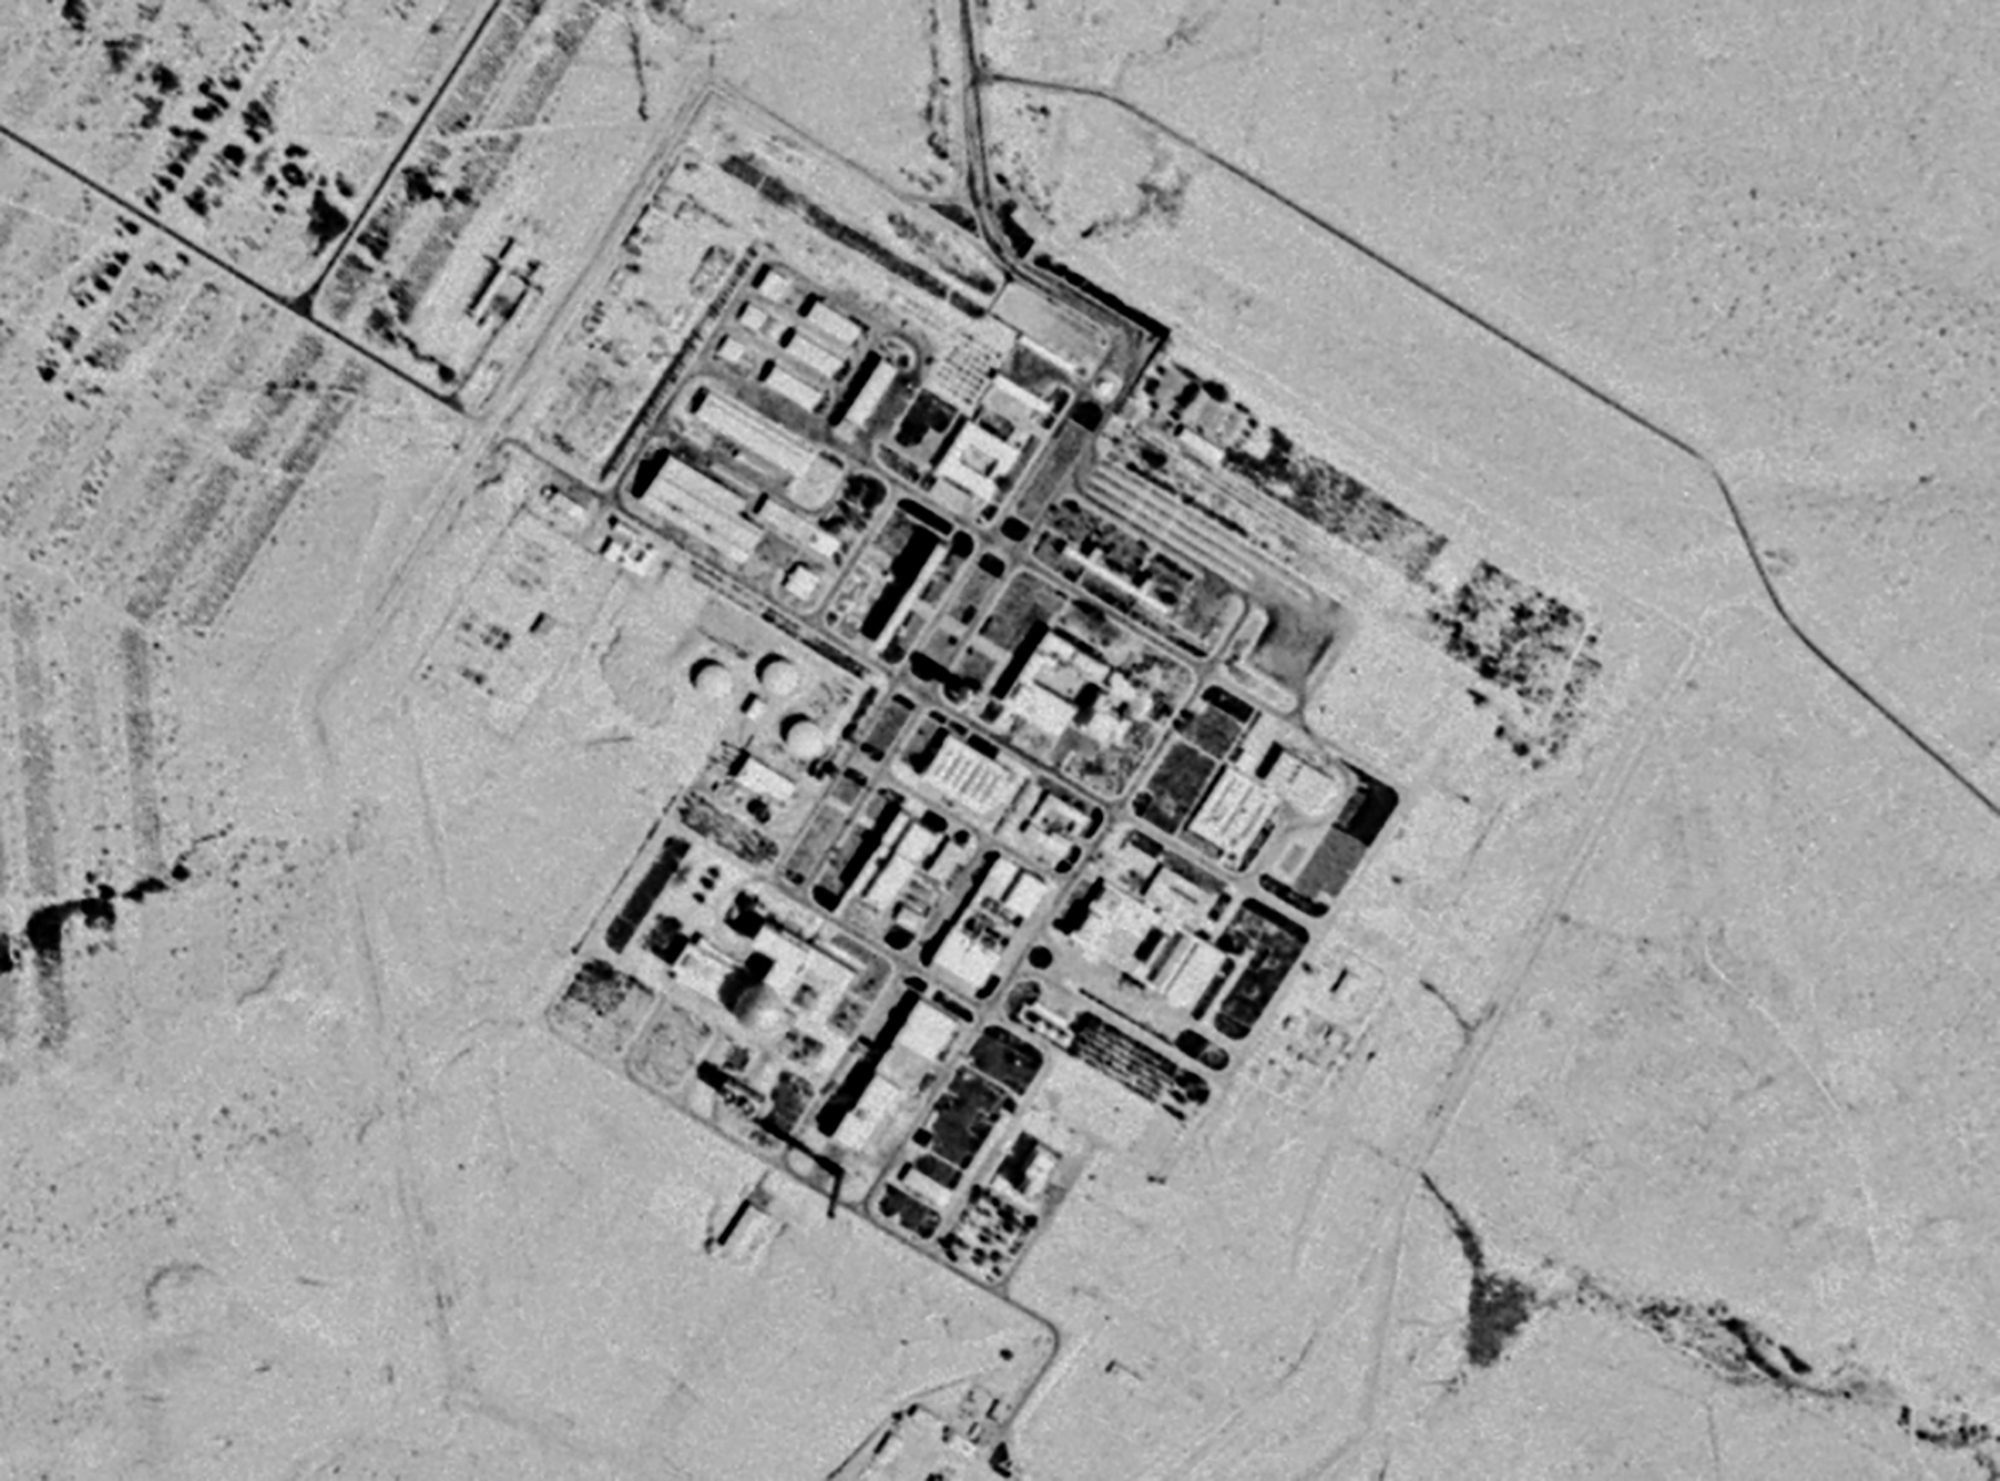 This Feb. 22, 2021, satellite photo shows construction near the Shimon Peres Negev Nuclear Research Center, not far from the city of Dimona, Israel. A long-secretive Israeli nuclear facility that gave birth to its undeclared atomic weapons program is undergoing what appears to be its biggest construction project in decades, according to analysis by AP. (Planet Labs Inc. via AP)